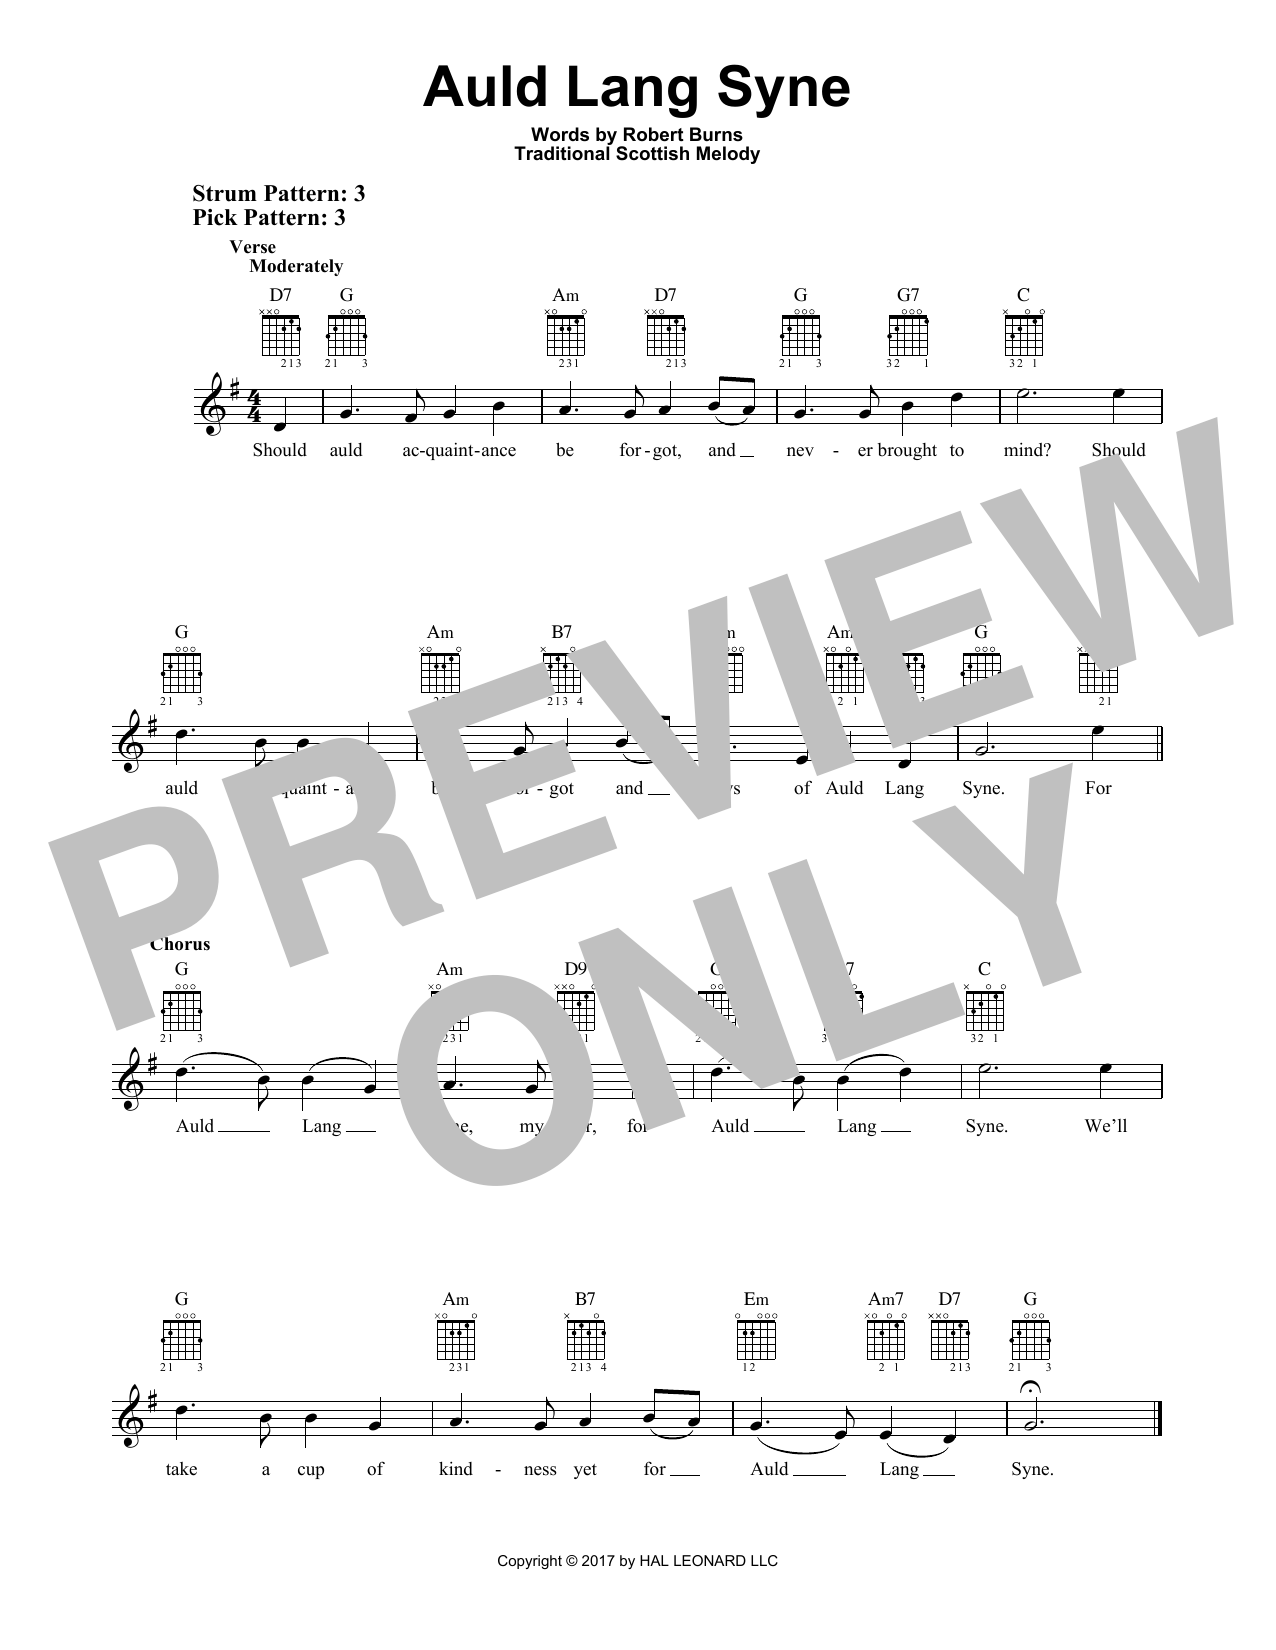 Download Traditional Auld Lang Syne Sheet Music